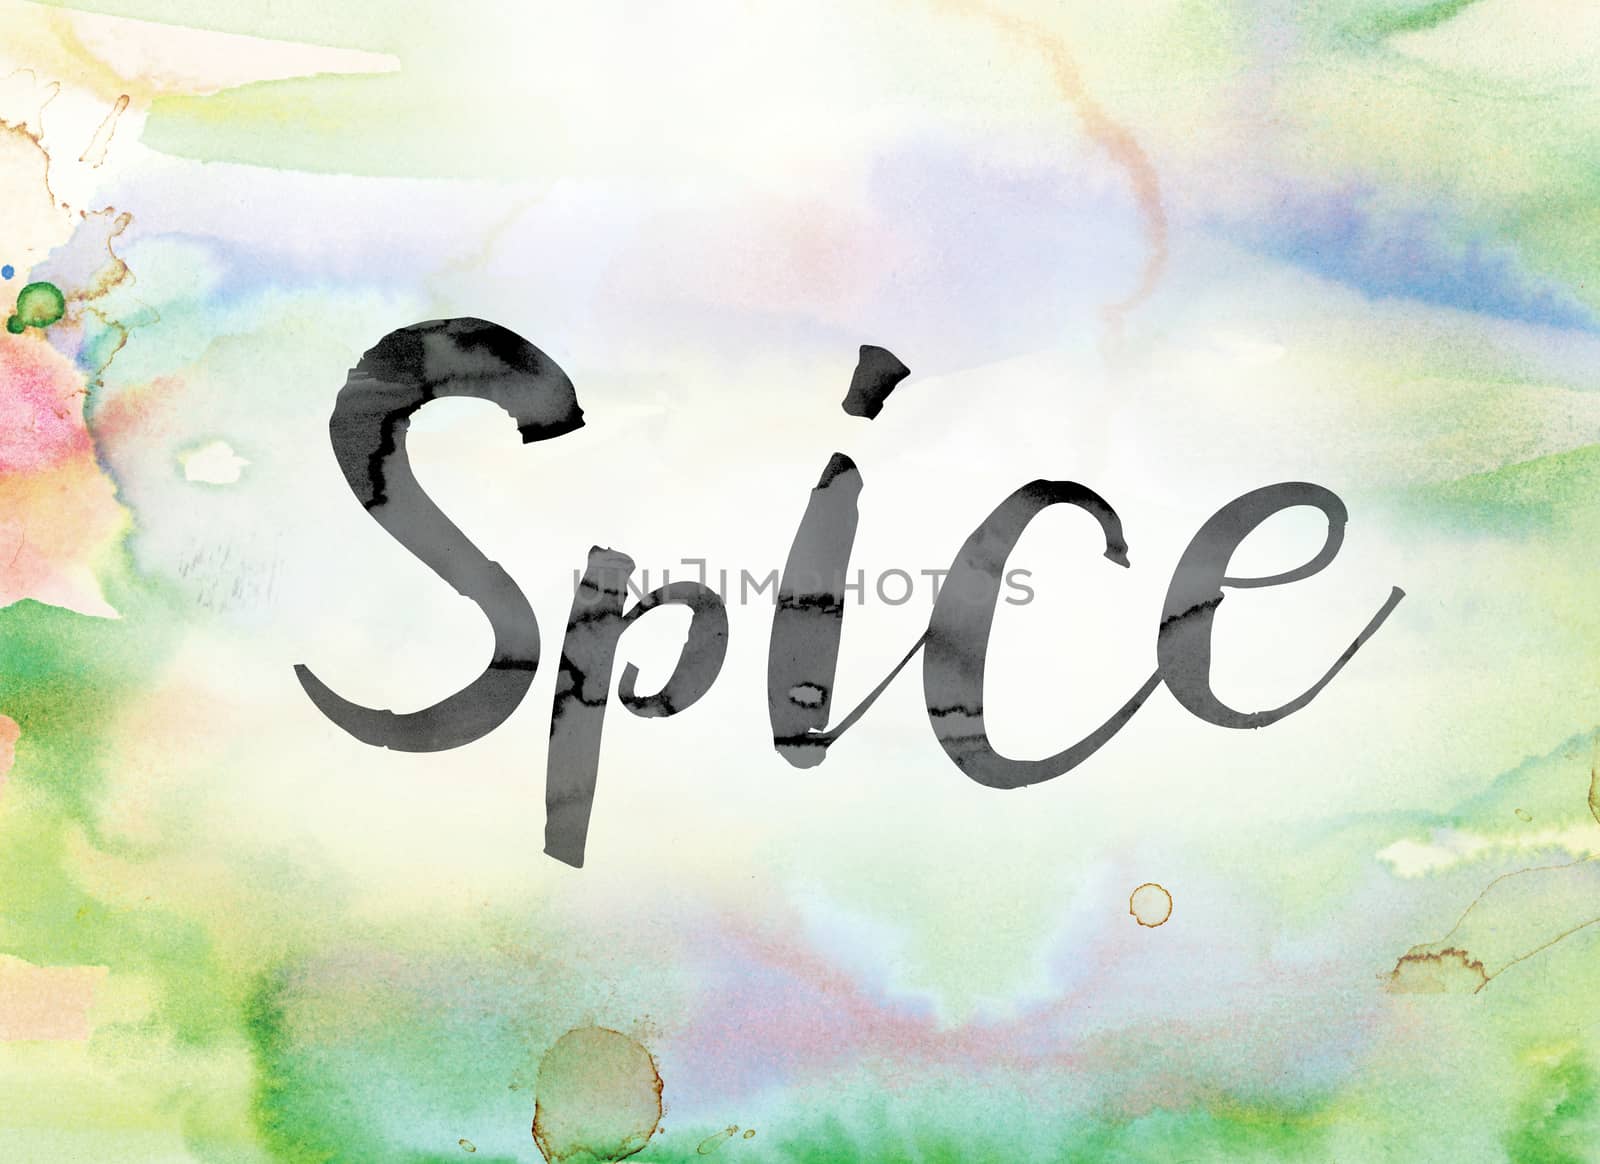 The word "Spice" painted in black ink over a colorful watercolor washed background concept and theme.